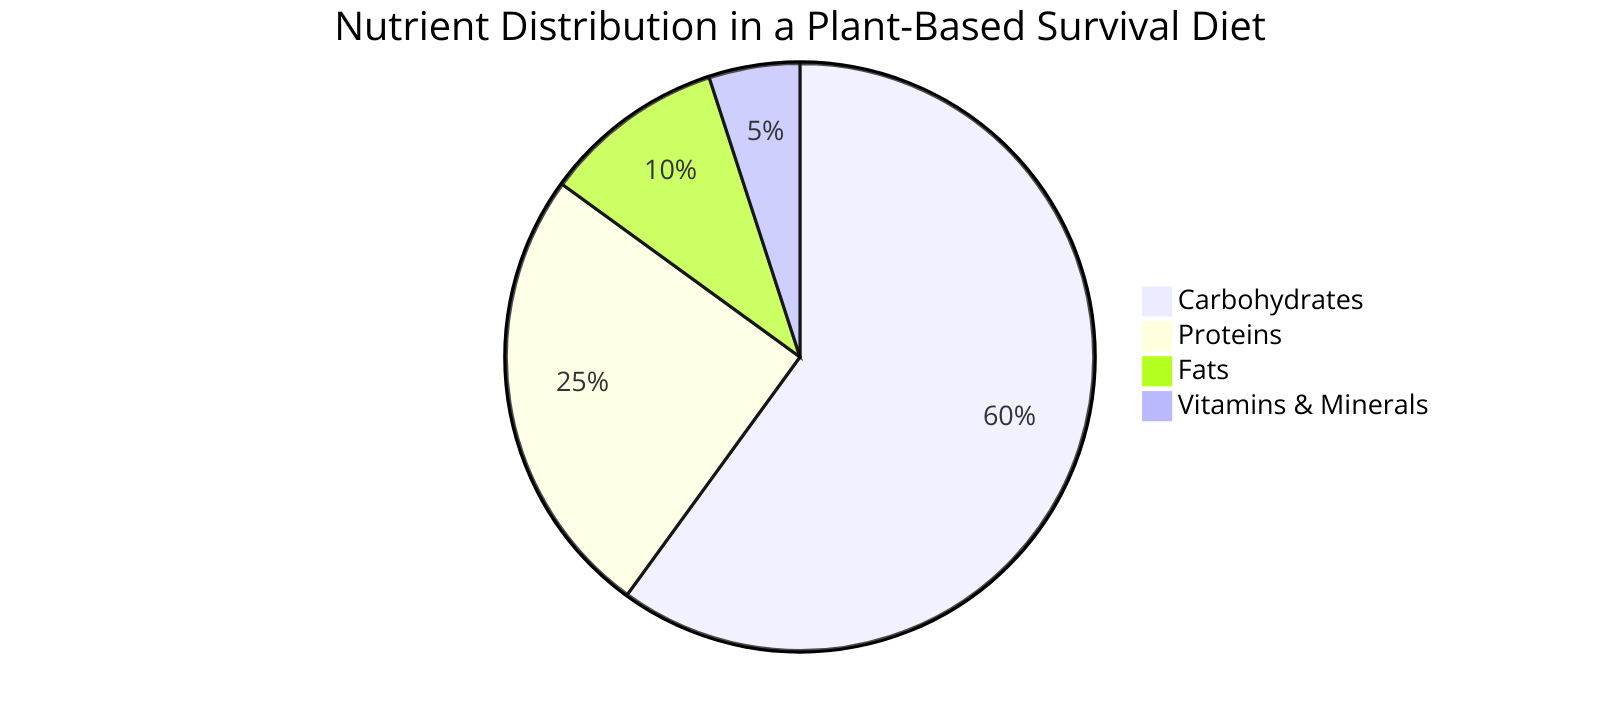  the nutrient distribution in a plant-based survival diet